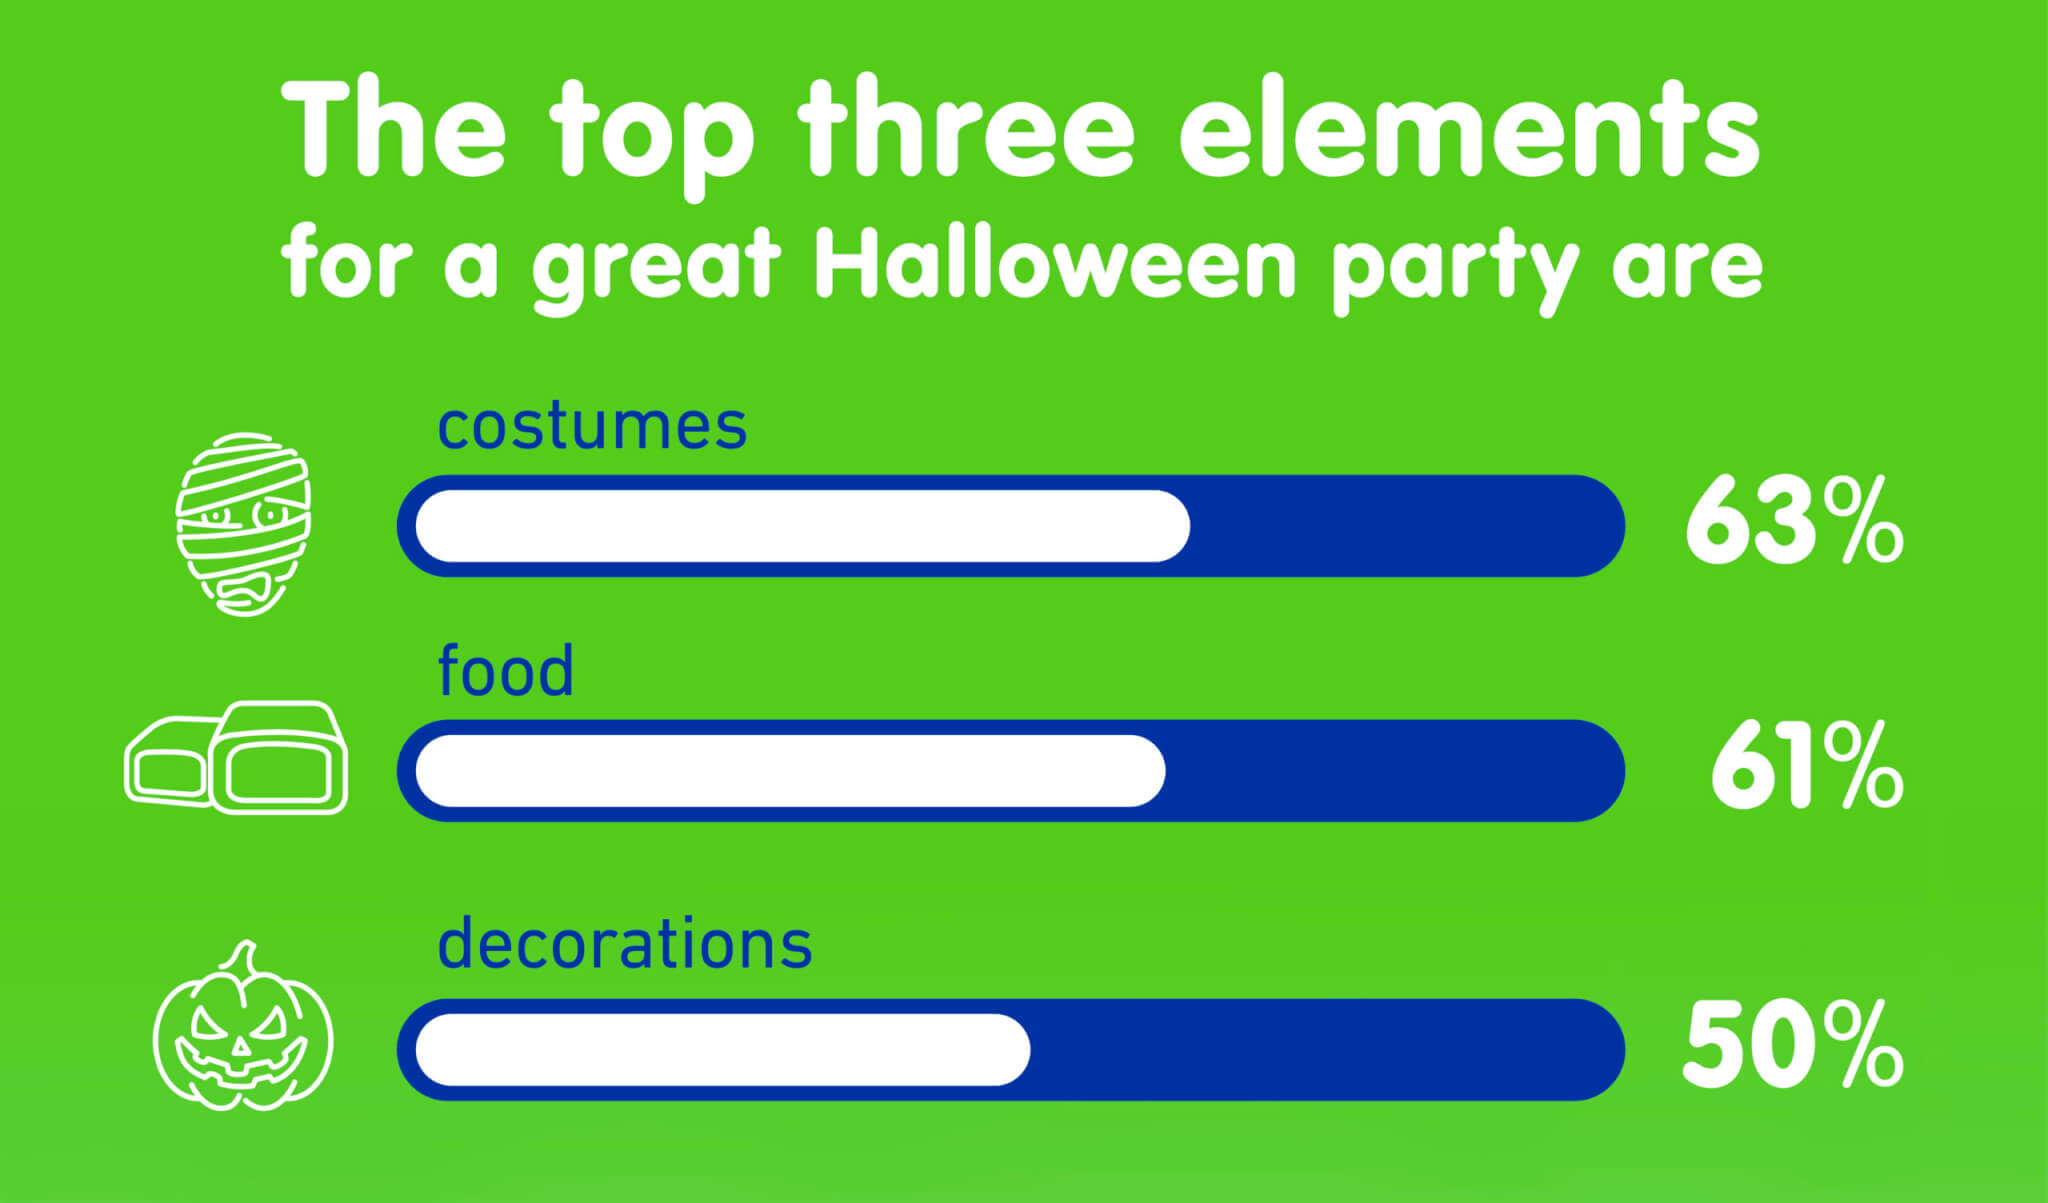 infographic showing top three elements of a great Halloween party according to new poll.